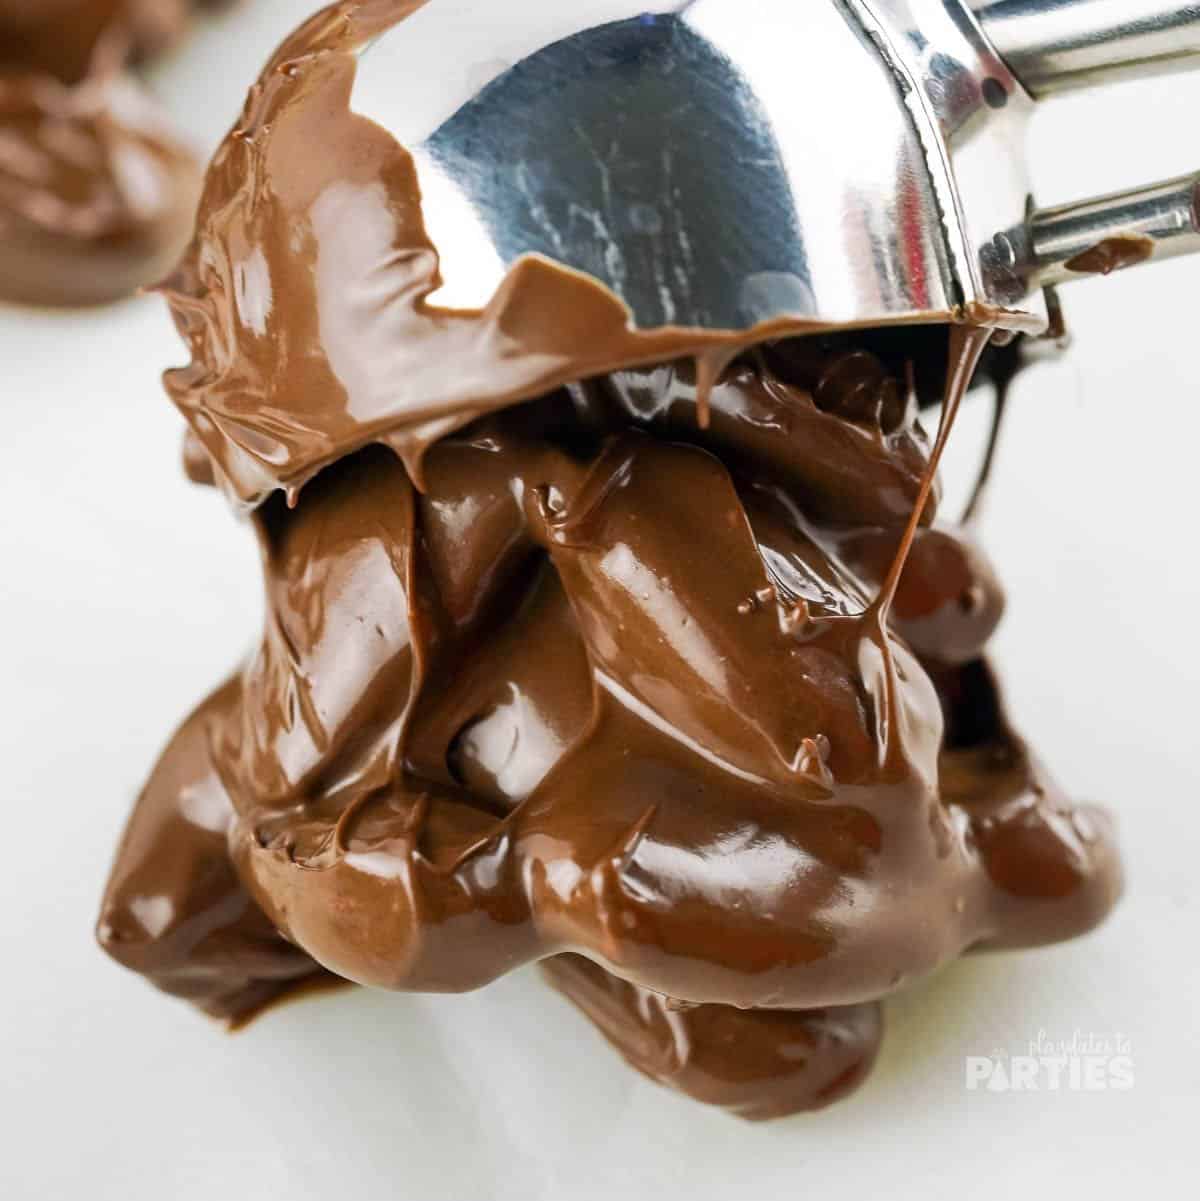 Scooping chocolate coated almonds onto parchment paper.